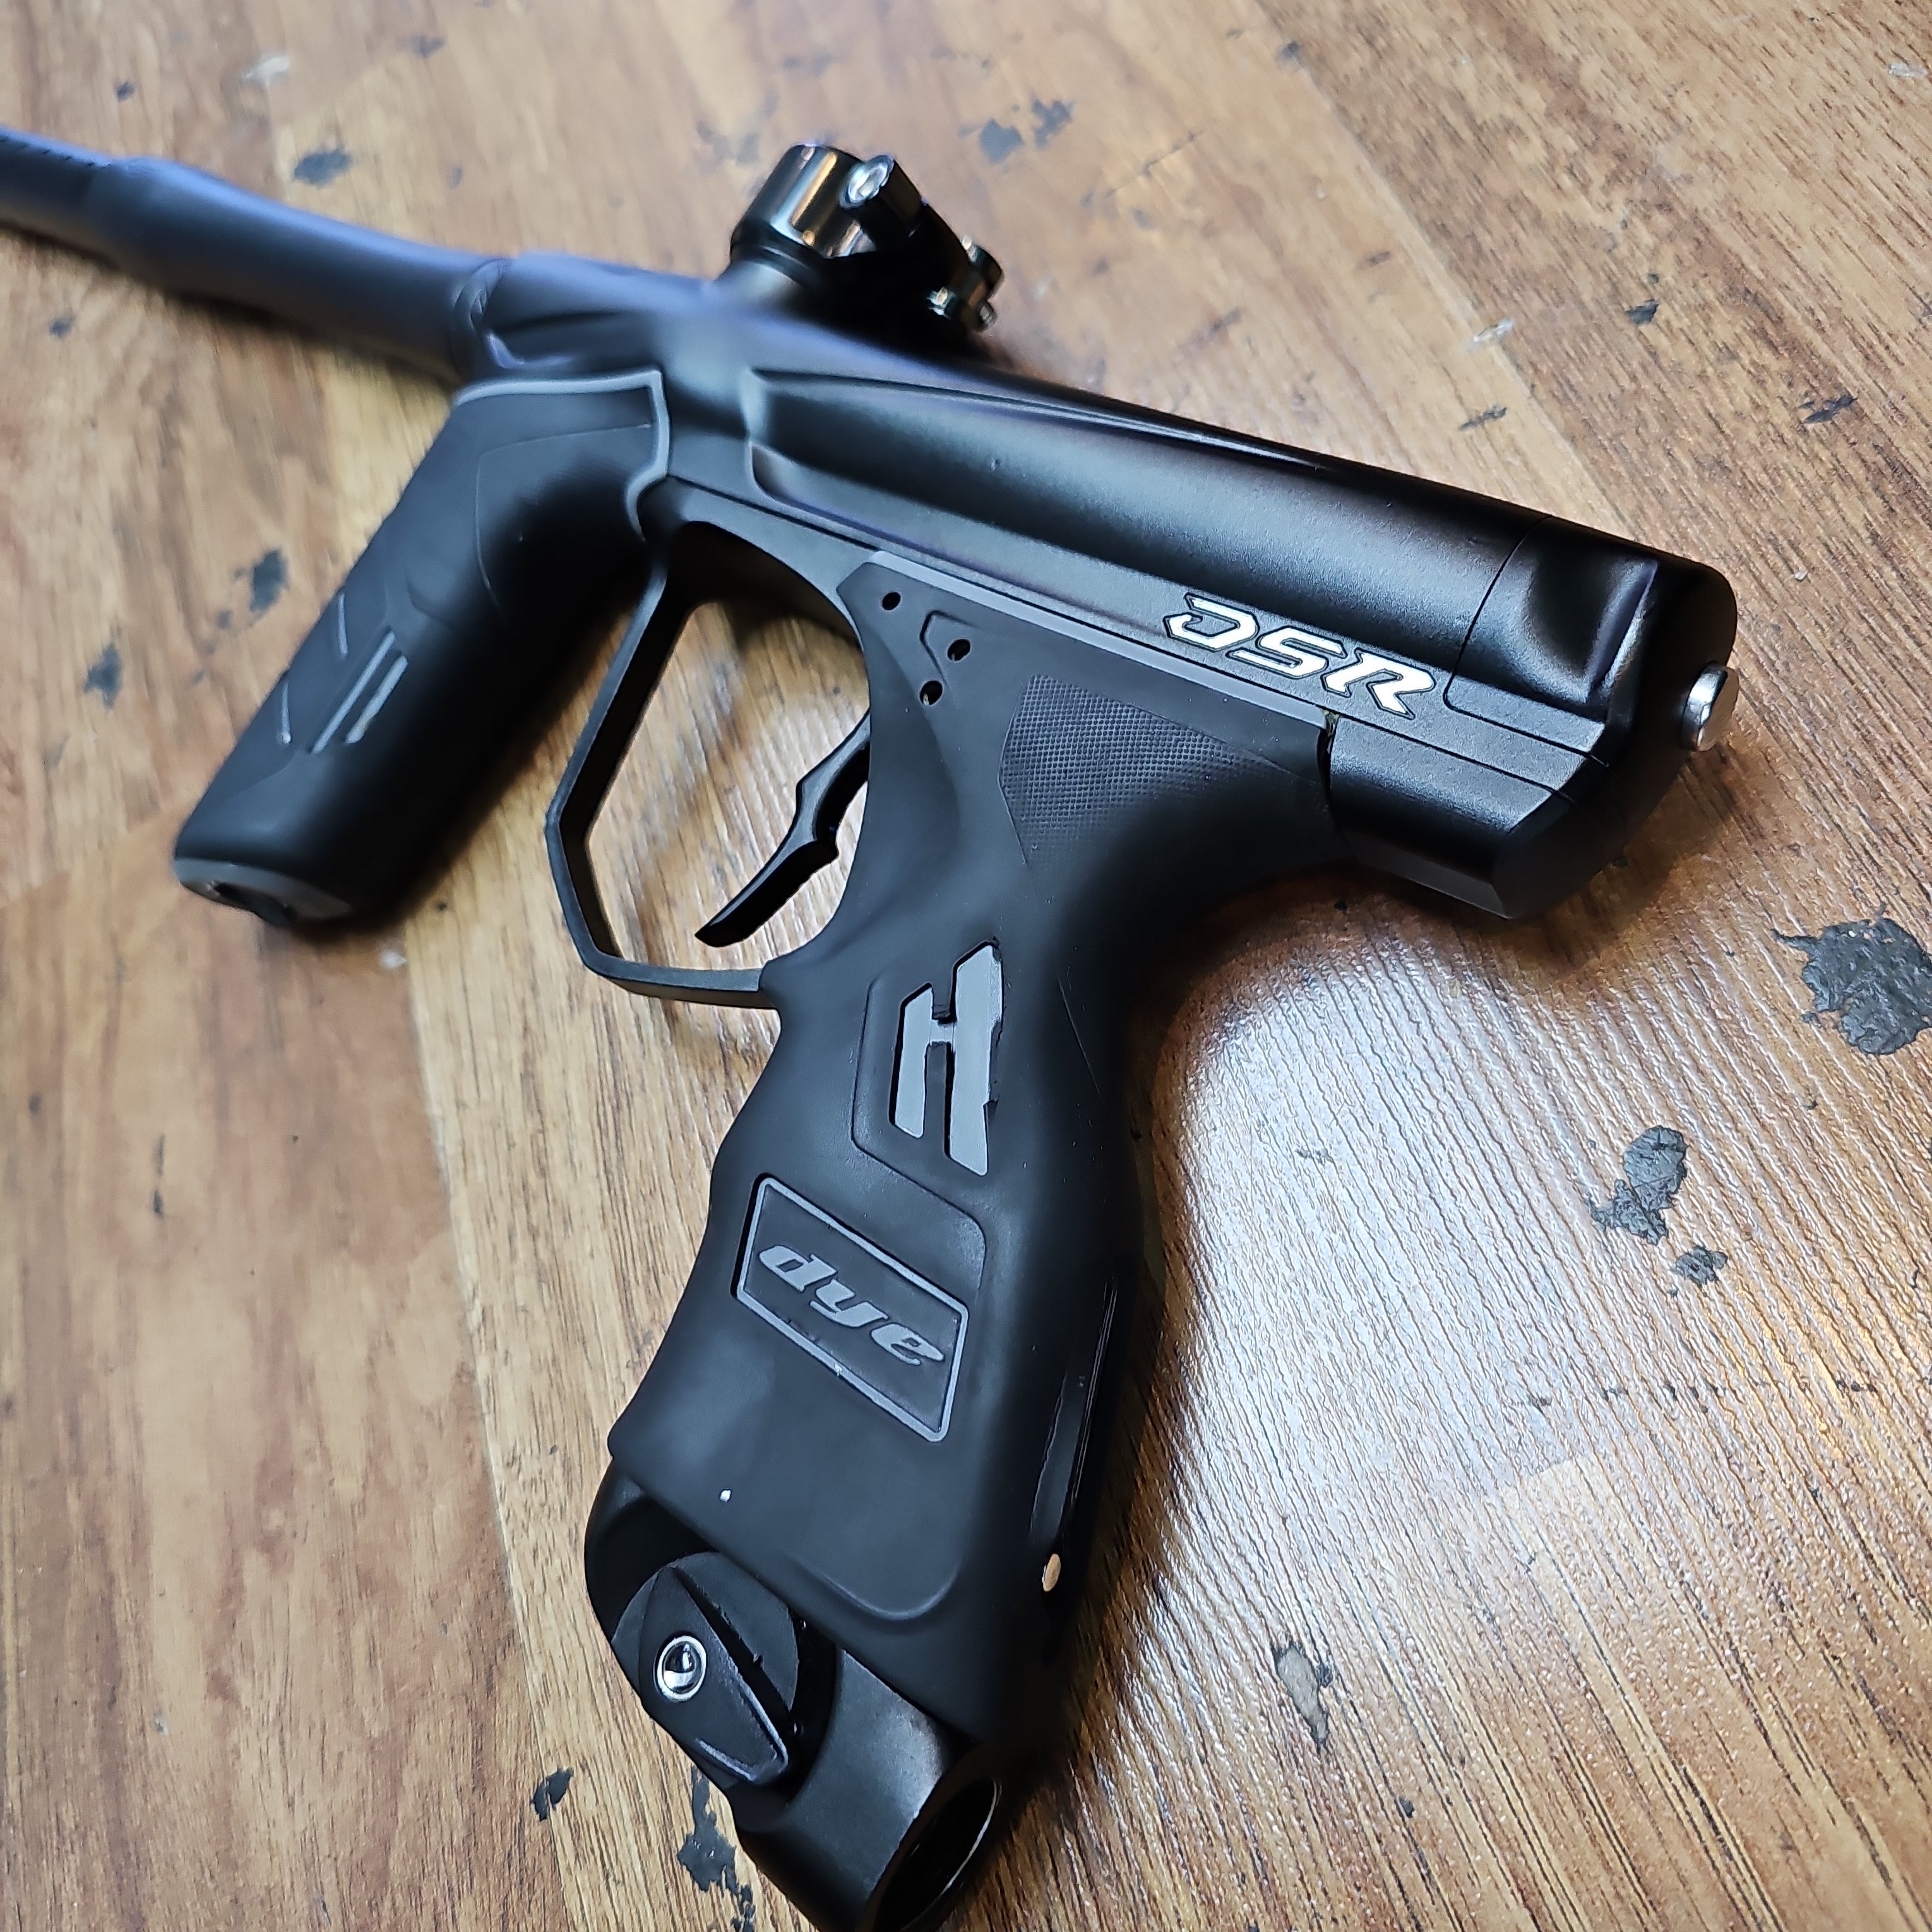 USED - Dye DSR - Black - Eminent Paintball And Airsoft